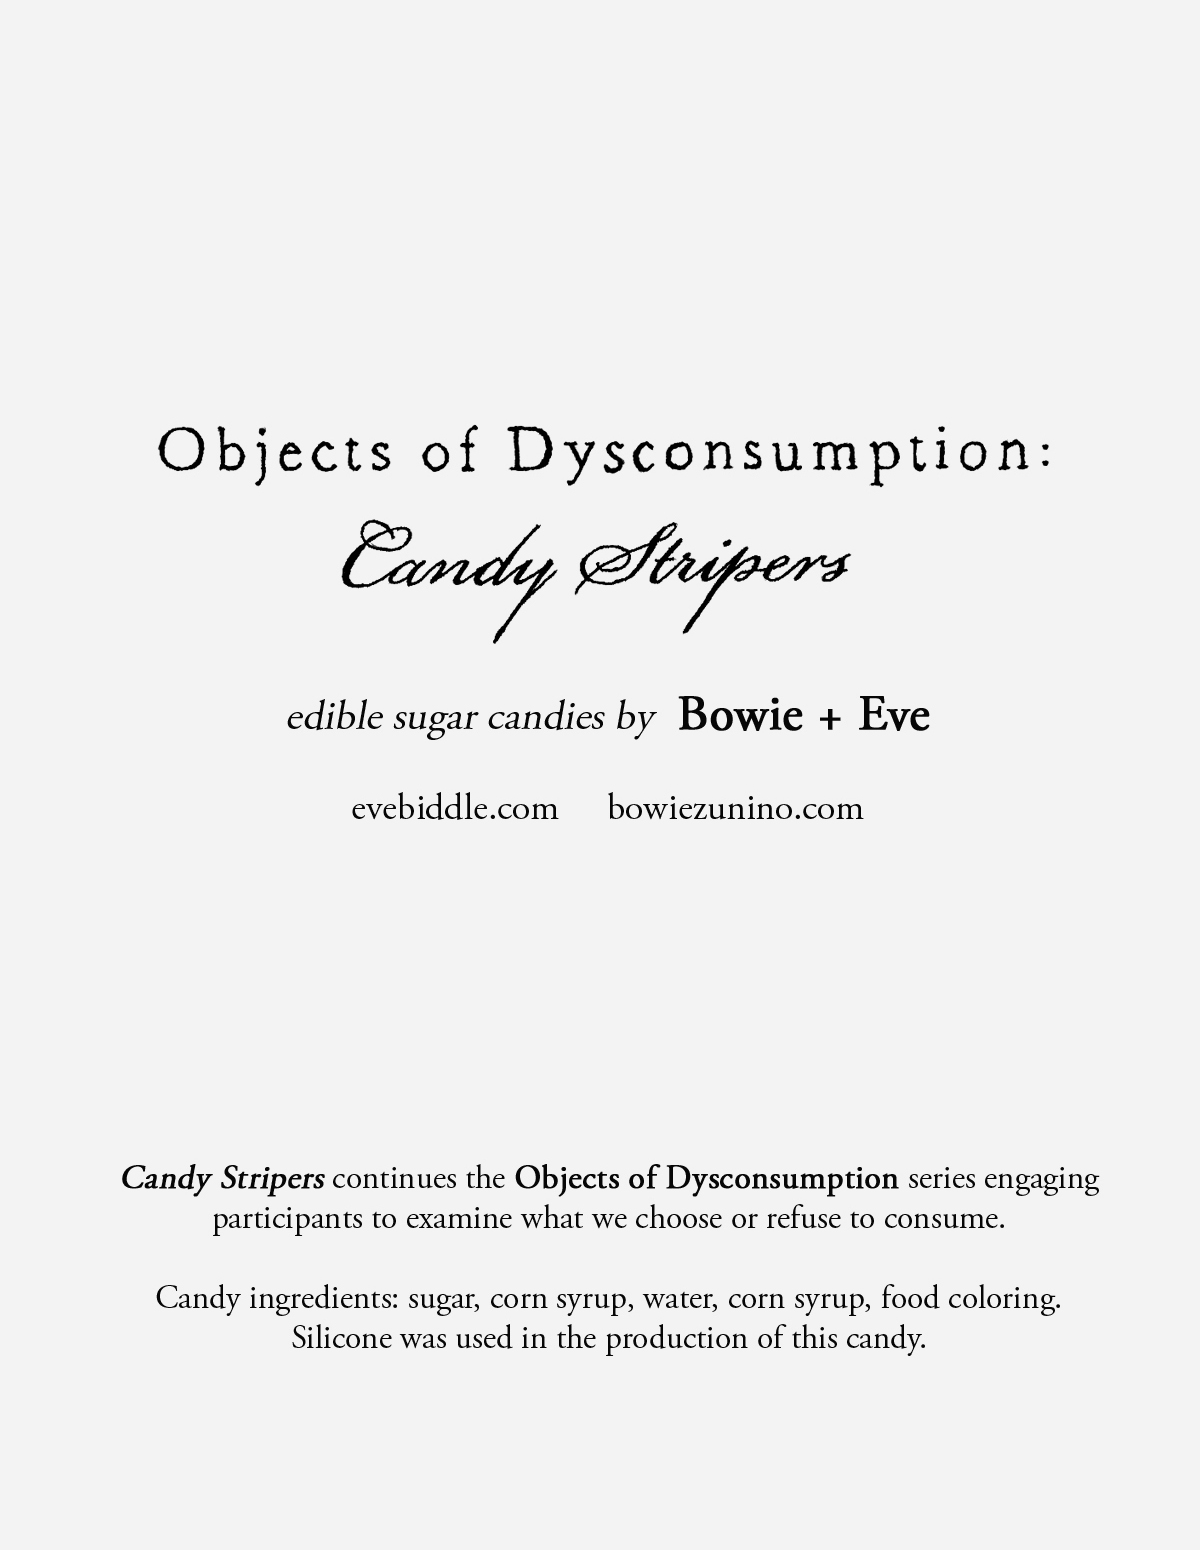 Screenshot of a text insert for an art show that reads: Objects of Dysconsumption: Candy Stripers. Edible Sugar Candies by Bowie + Eve. EveBiddle dot com. BowieZunino dot com. Candy Stripers continues the Objects of Dysconumption series engaging participants to examine what we choose or refuse to consume. Candy ingredients: sugar, corn sytup, water, corn syrup, food coloring. Silicone was used in the production of this candy.